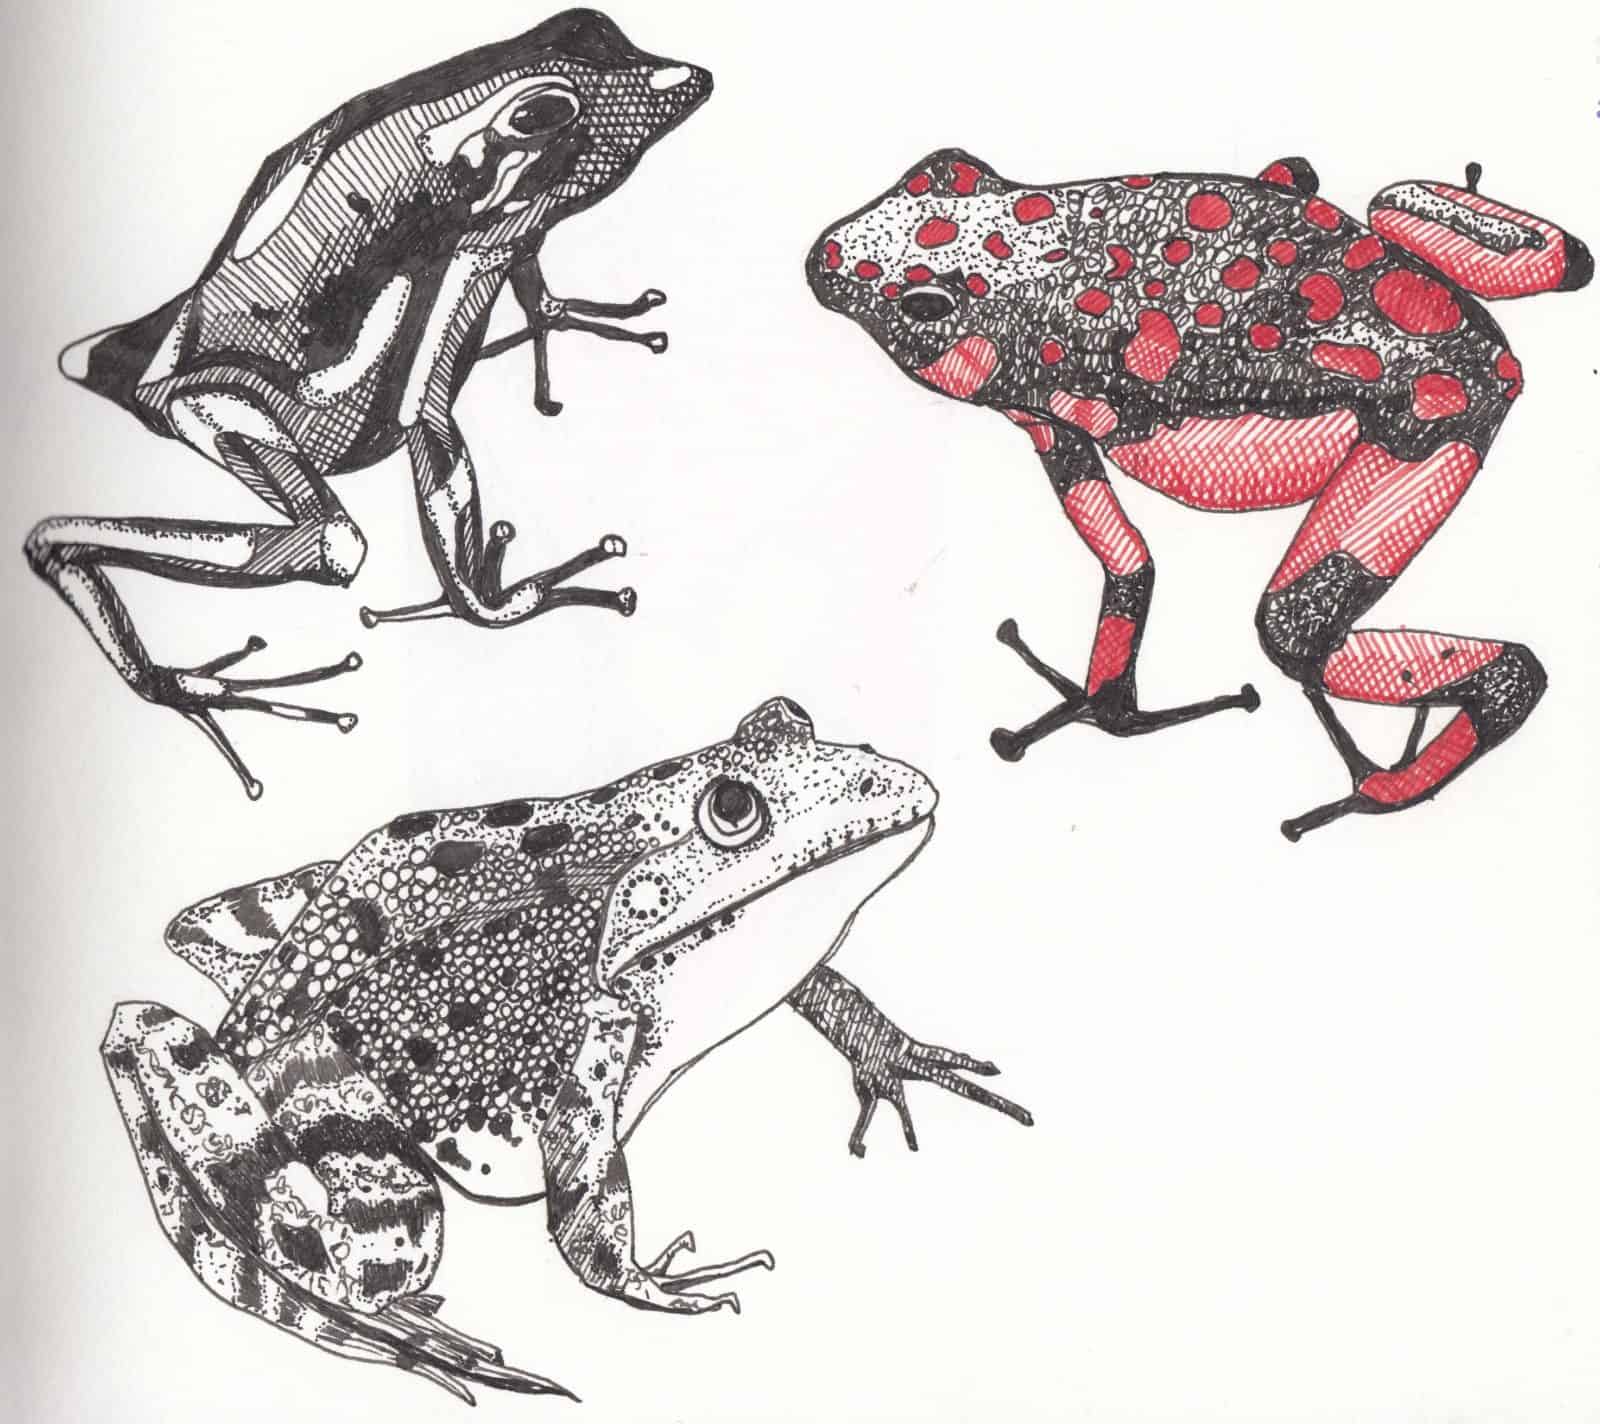 Drawing of frogs by Debora Cane